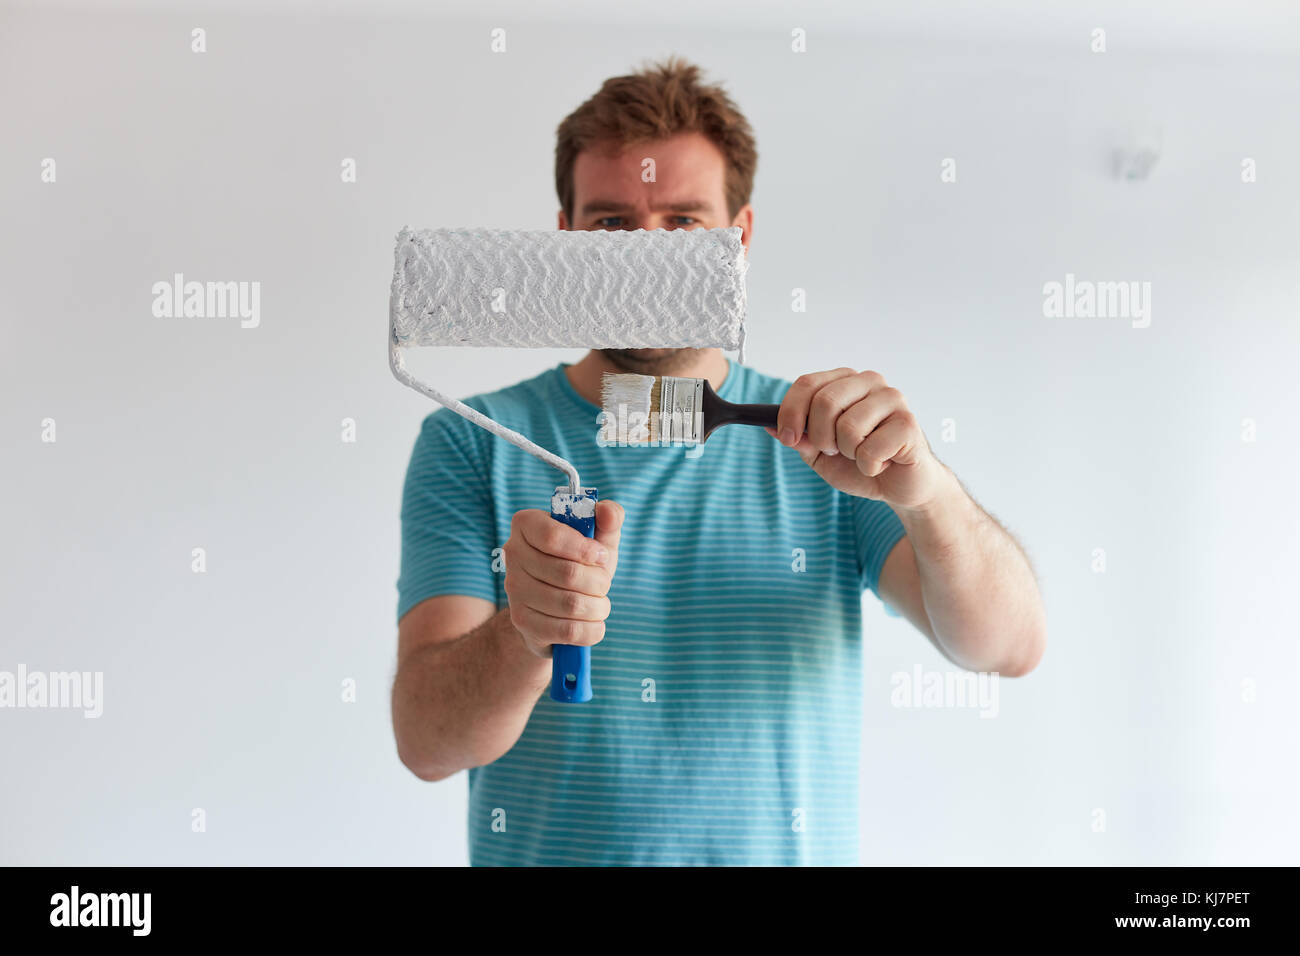 Smiling man holding a brush and a roller in front of him Stock Photo